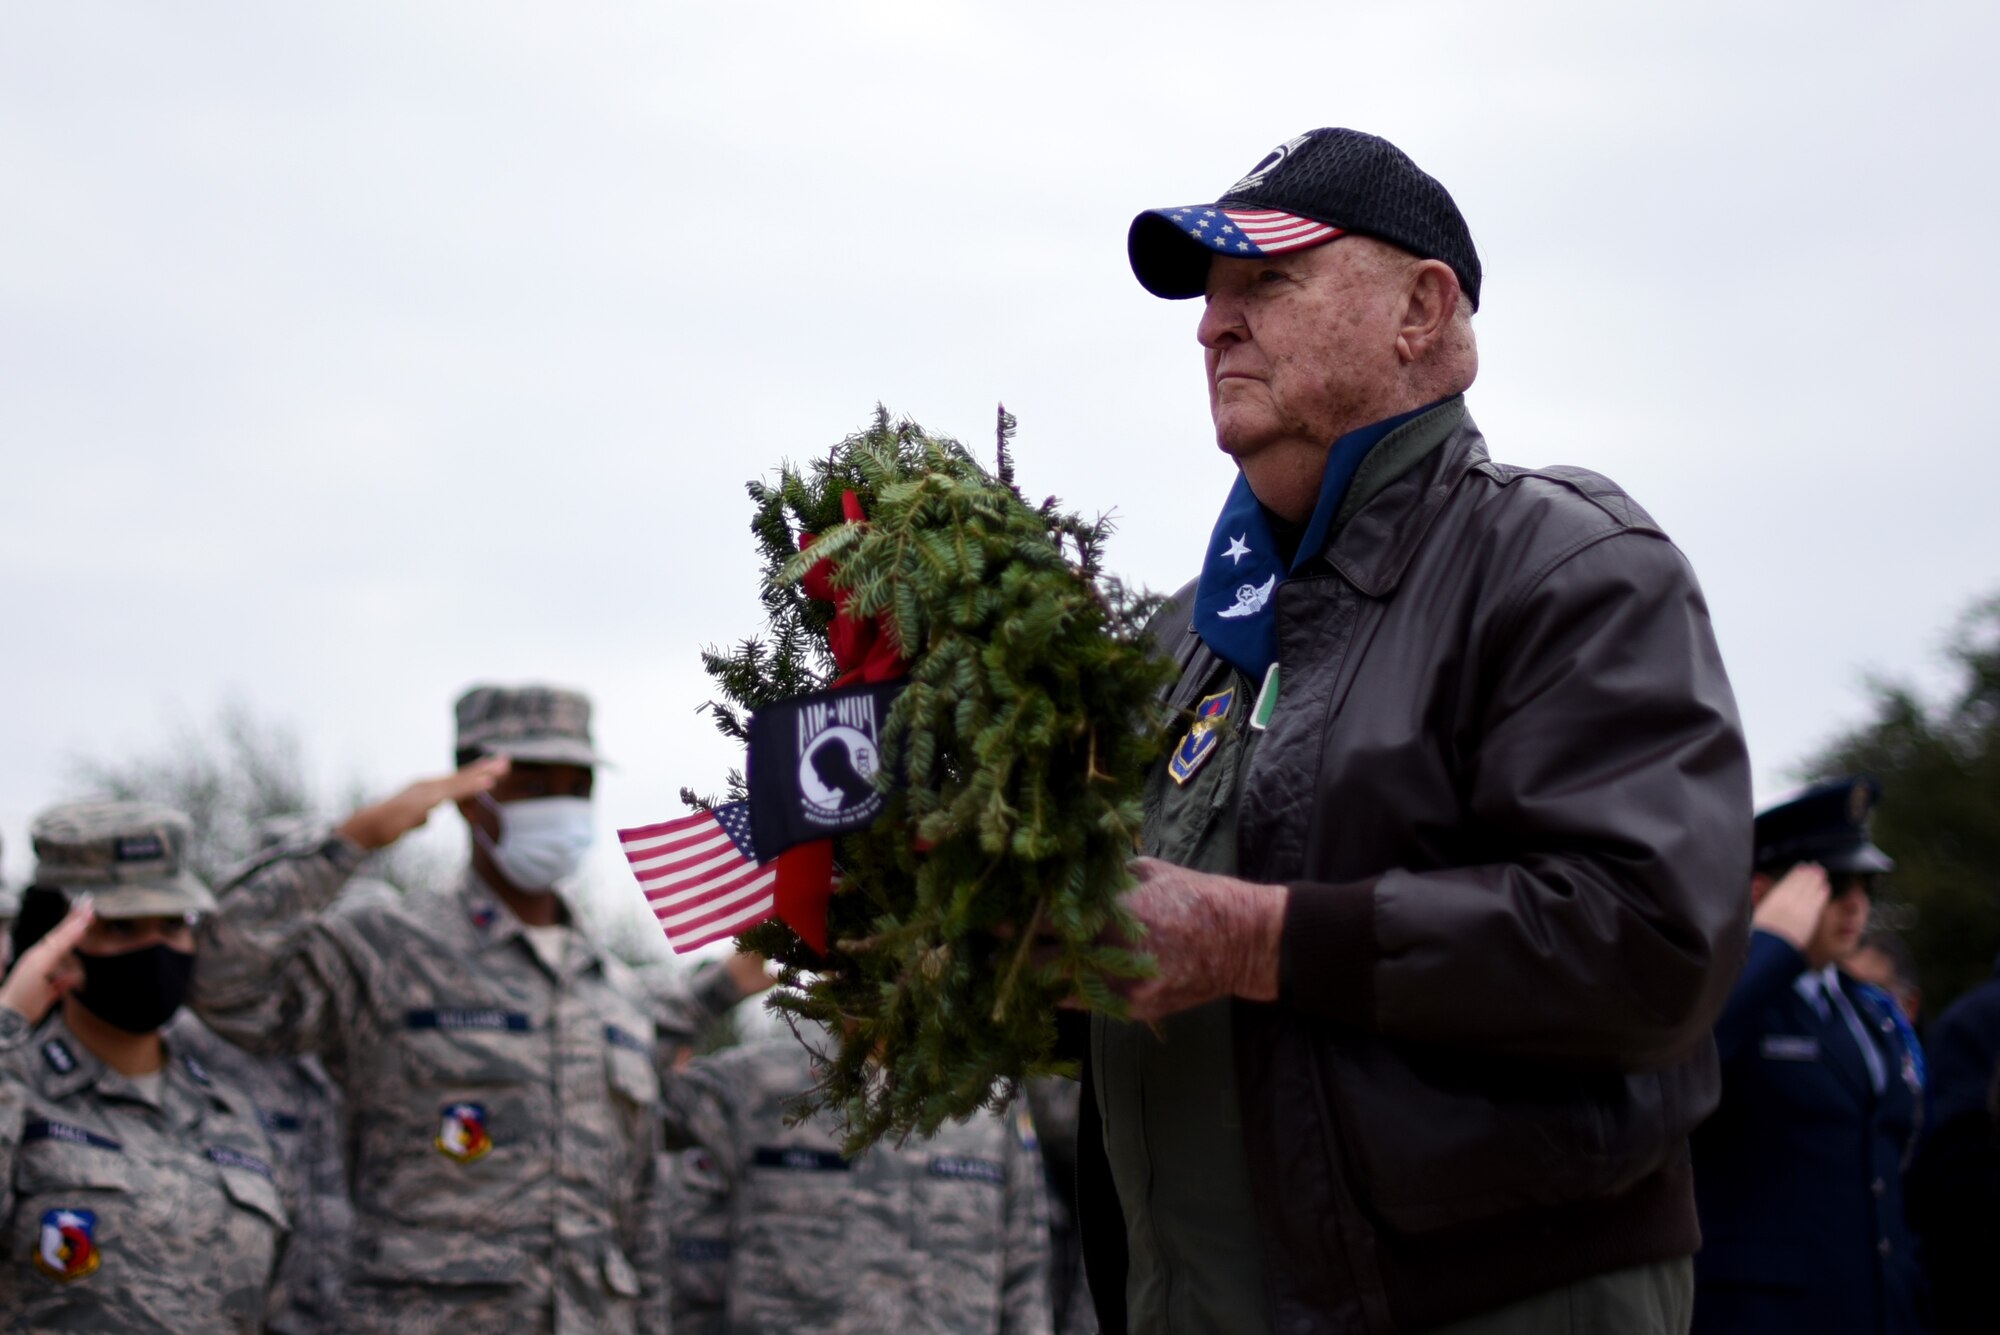 Col. John Yuill, retired, carries the Prisoner of War wreath during a Wreaths Across America event at the Dallas-Fort Worth National Cemetery on Dec. 18, 2021. Yuill was interned as a Prisoner of War in North Vietnam after he was shot down on December 22, 1972 and was held until his release on March 29, 1973. (U.S. Air Force photo by Staff Sgt. Randall Moose)